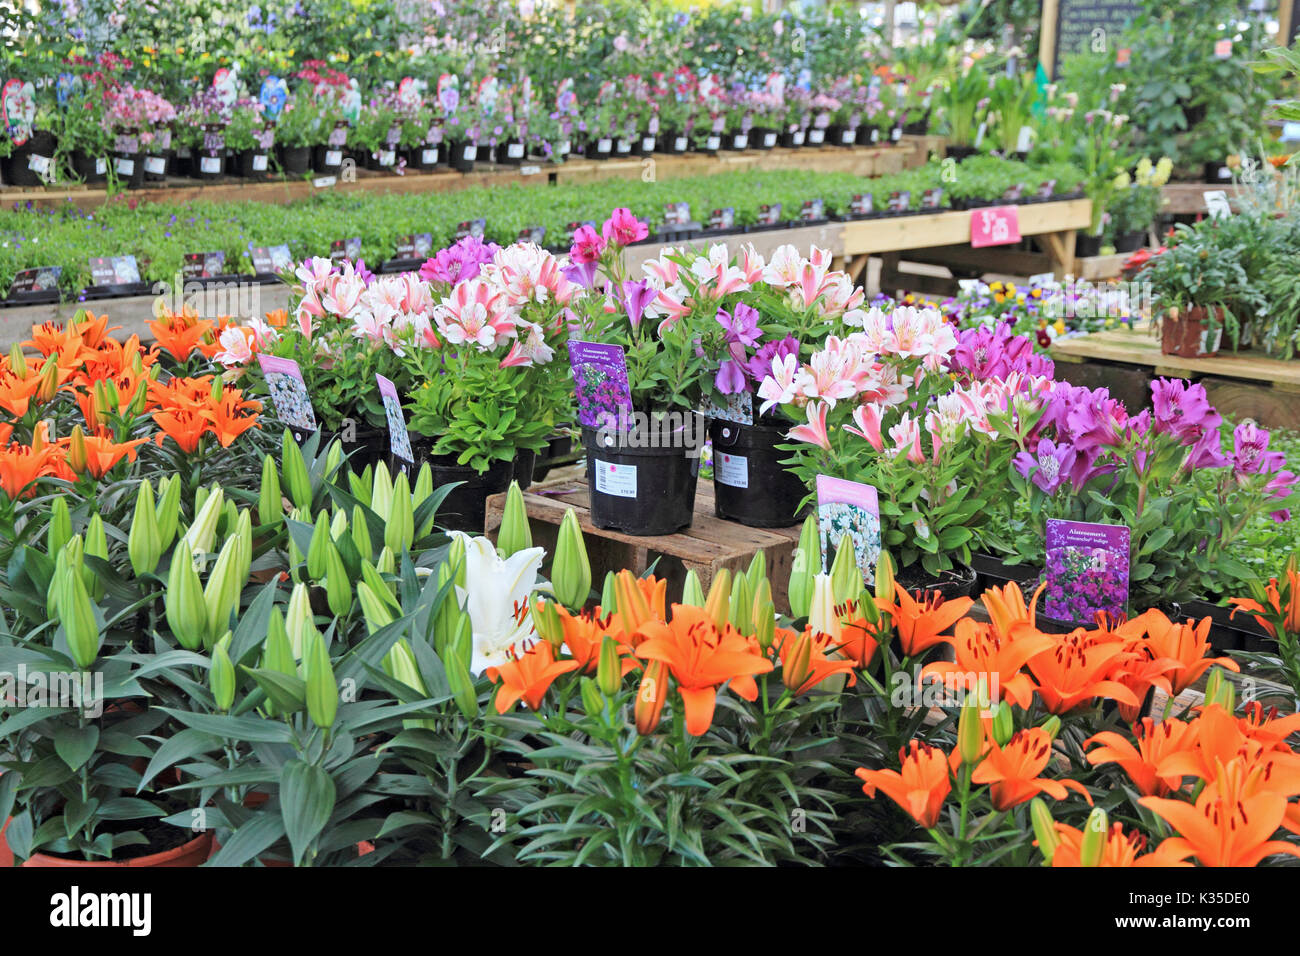 Flowering plants on sale at garden centre Stock Photo